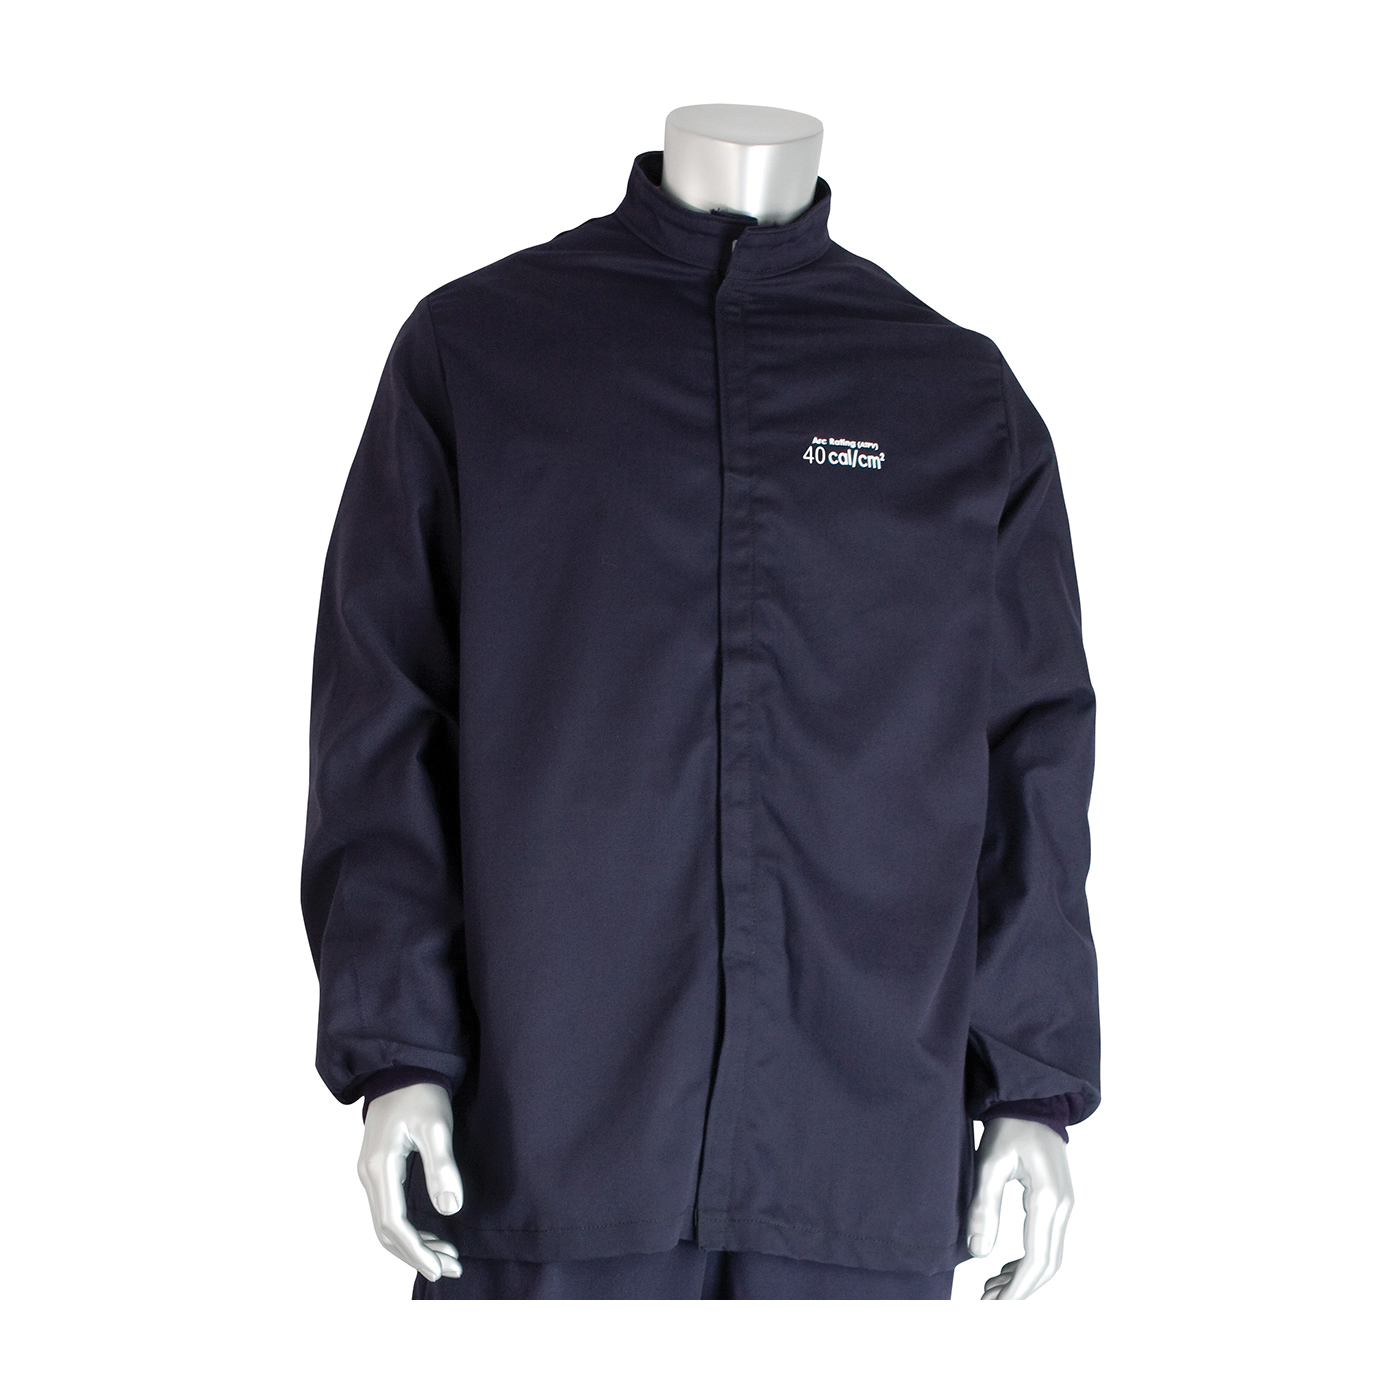 PIP® 9100-52412/S Arc and Flame Resistant Jacket, S, Navy, Westex® UltraSoft® 88% Cotton 12% High Tenacity Nylon, 36 to 38 in Chest, Resists: Arc and Flame, ASTM F1506-10a, ASTM F2178-12